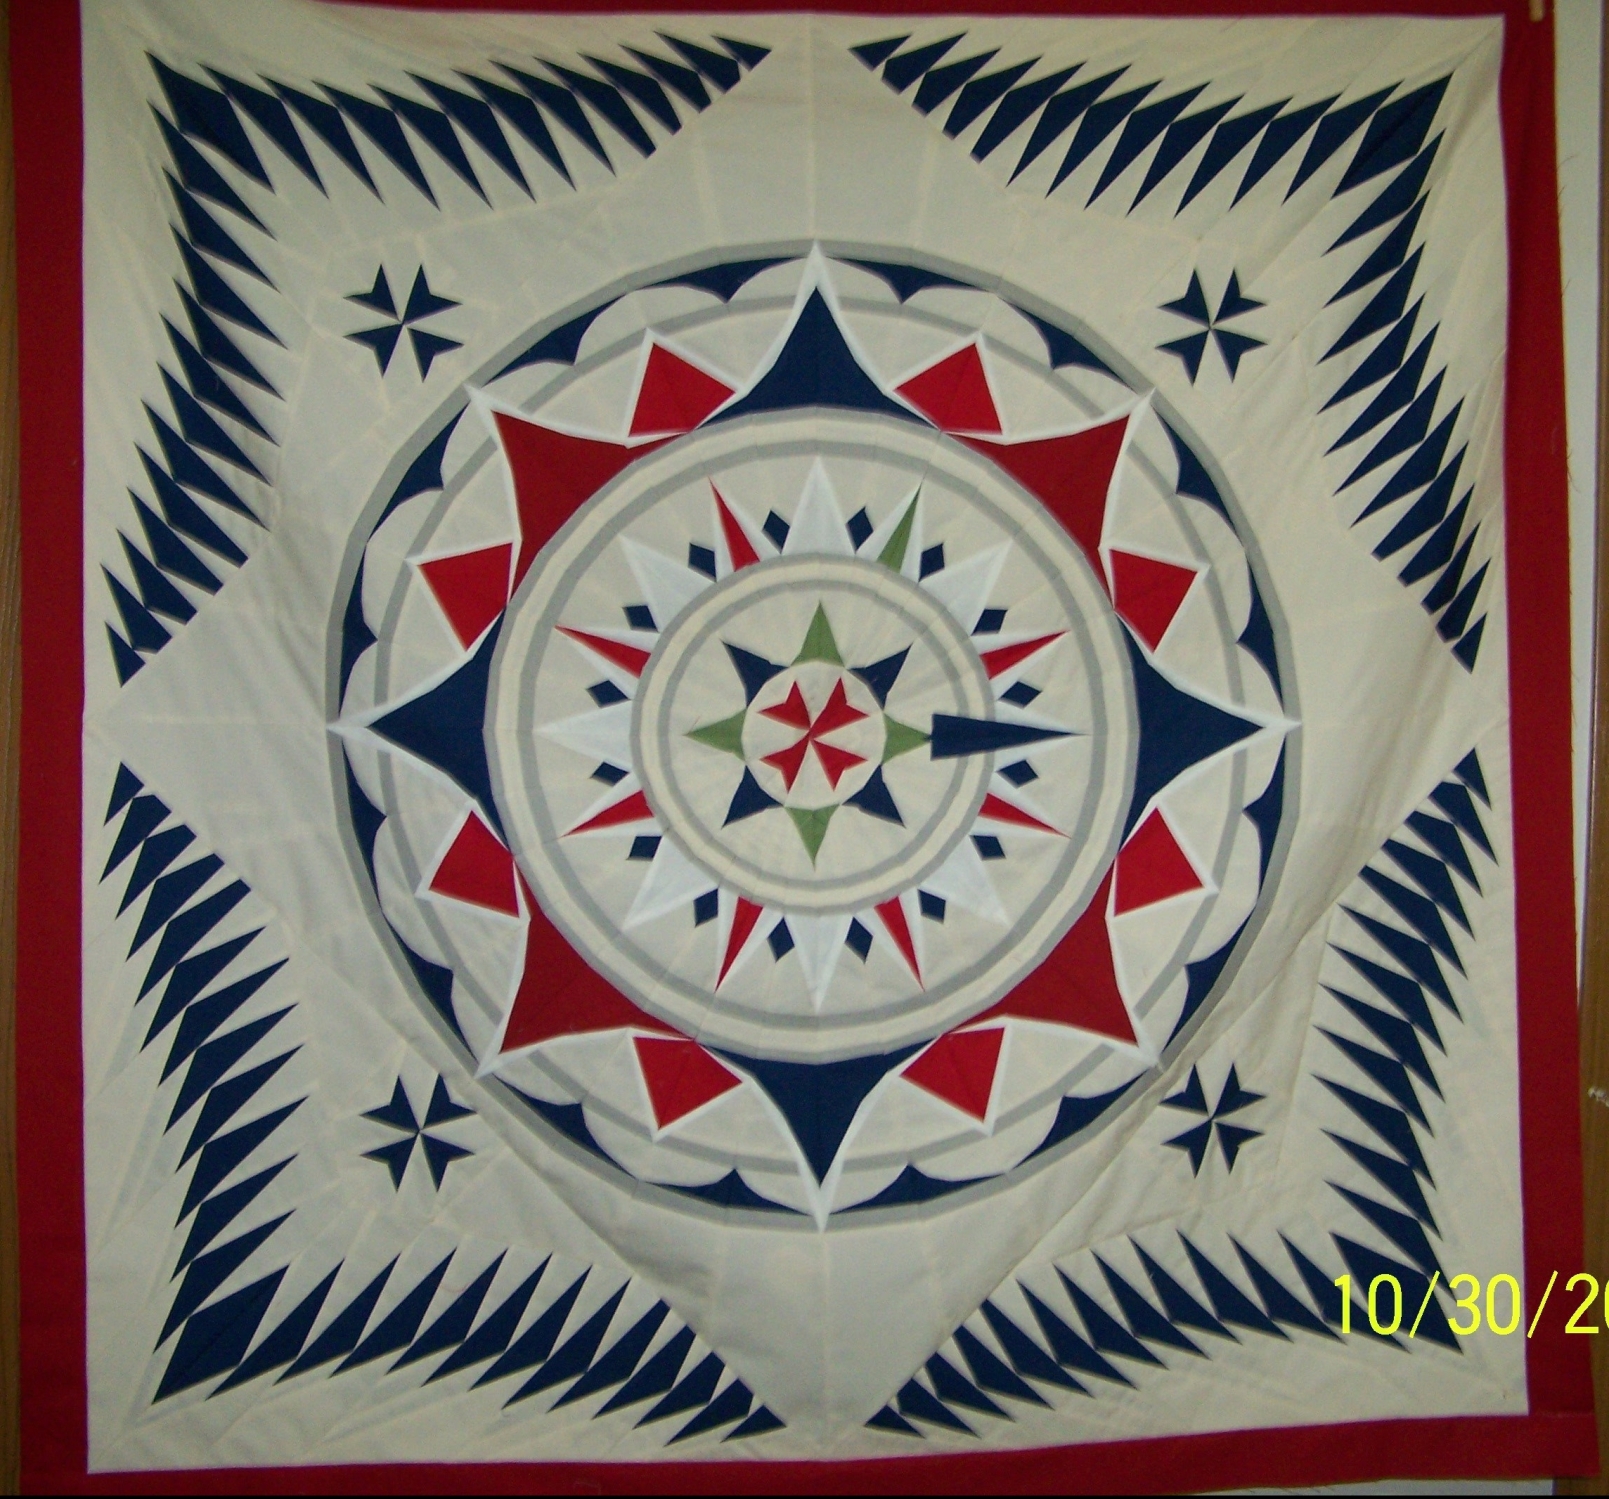 #paper pieced quilt #flying geese quilt #compass quilt #wind rose quilt